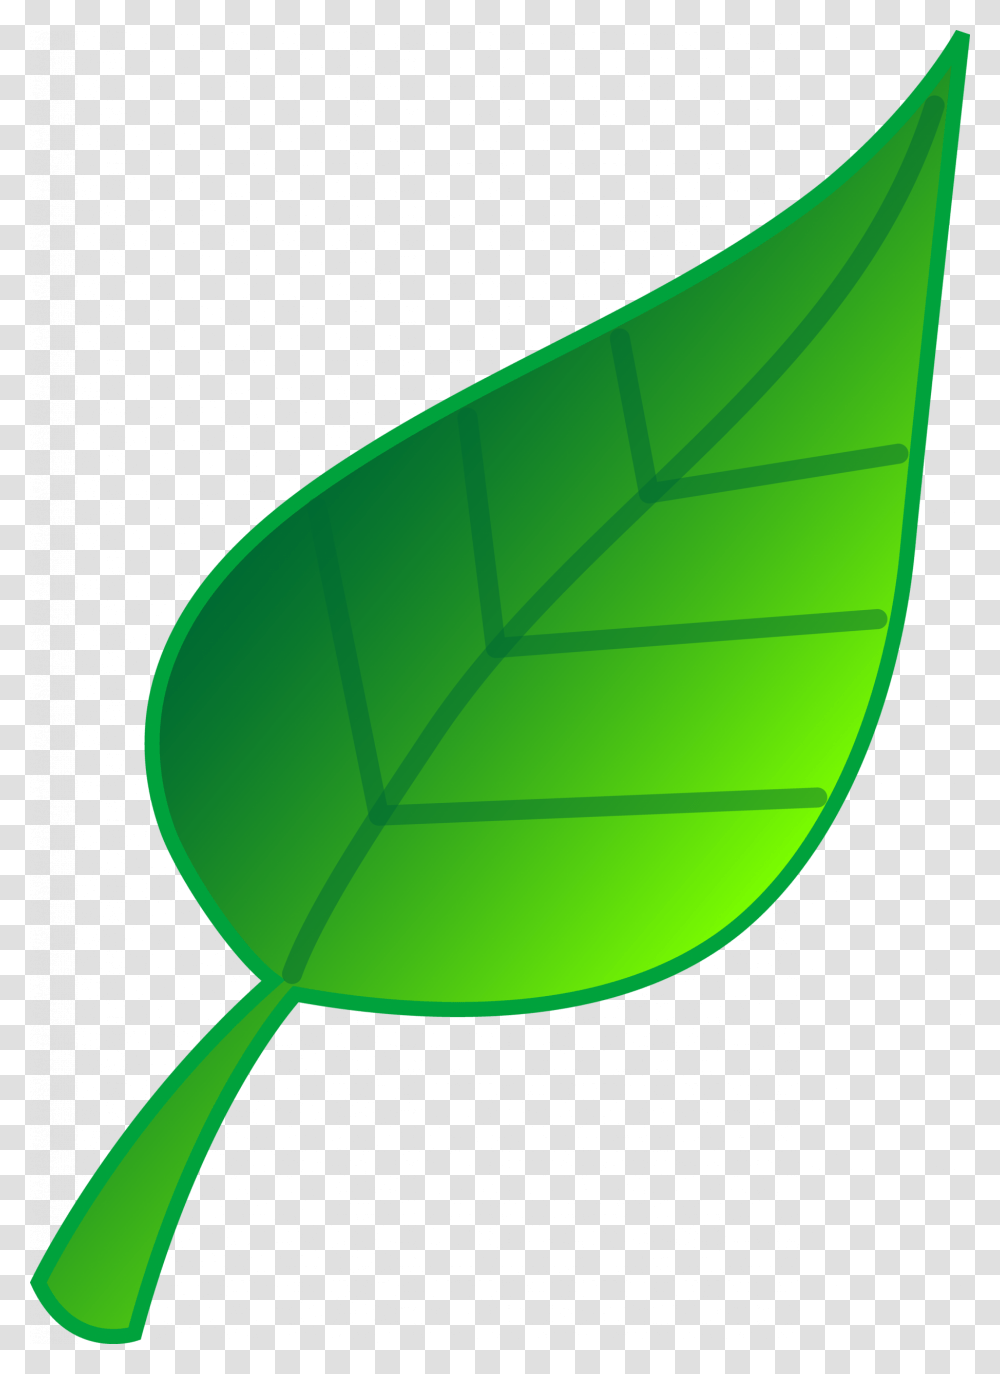 Holly Leaves Clipart To Printable To Clip Art Green Leaf, Plant, Veins, Soil, Balloon Transparent Png